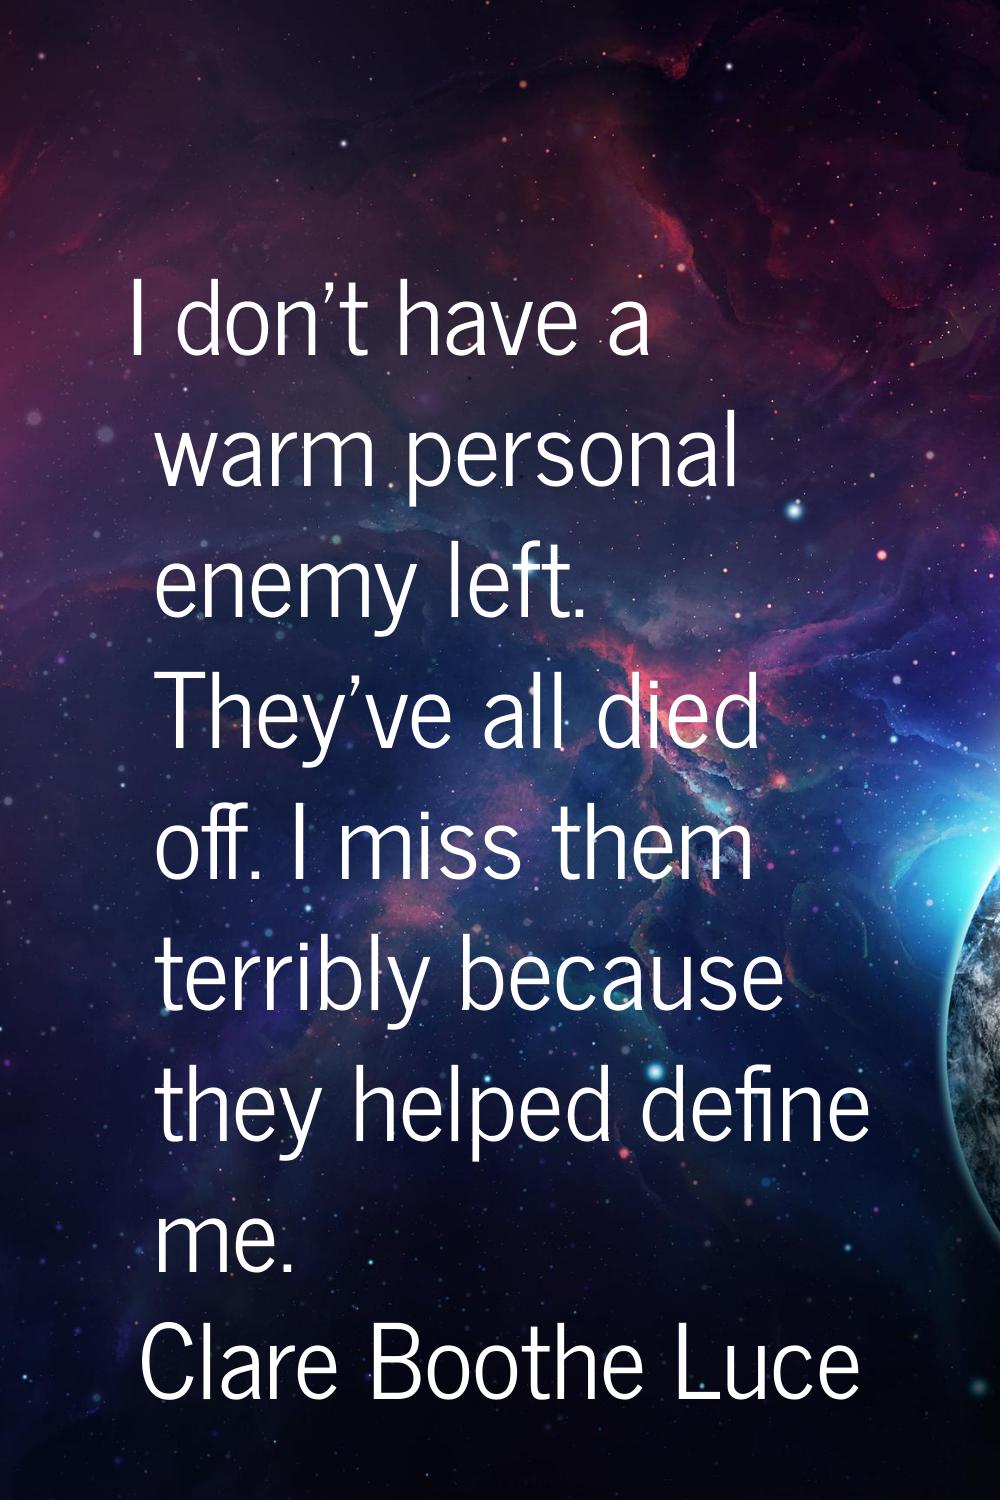 I don't have a warm personal enemy left. They've all died off. I miss them terribly because they he